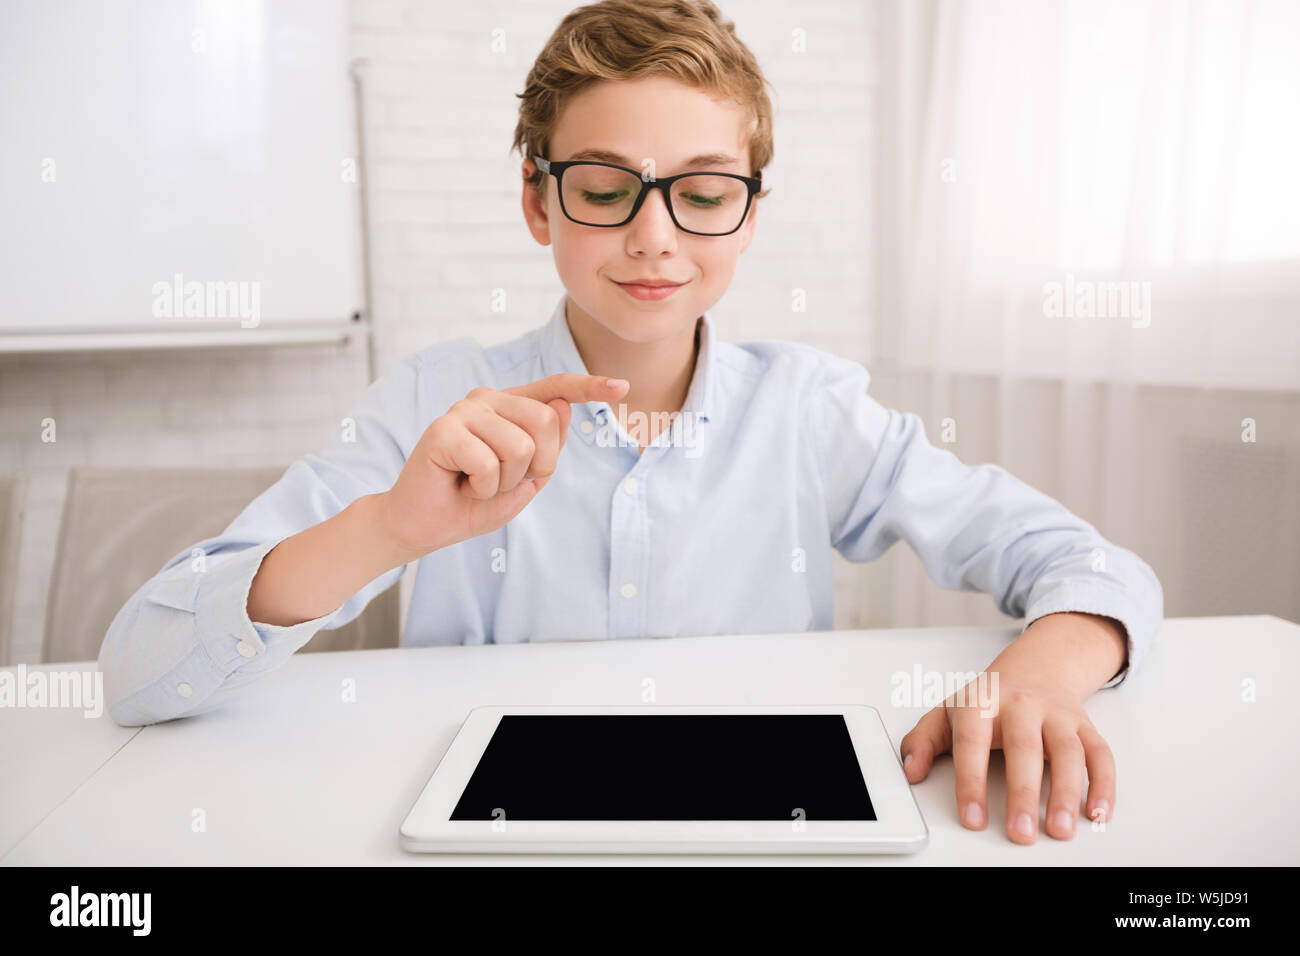 Boy with tablet pc studying in classroom Stock Photo